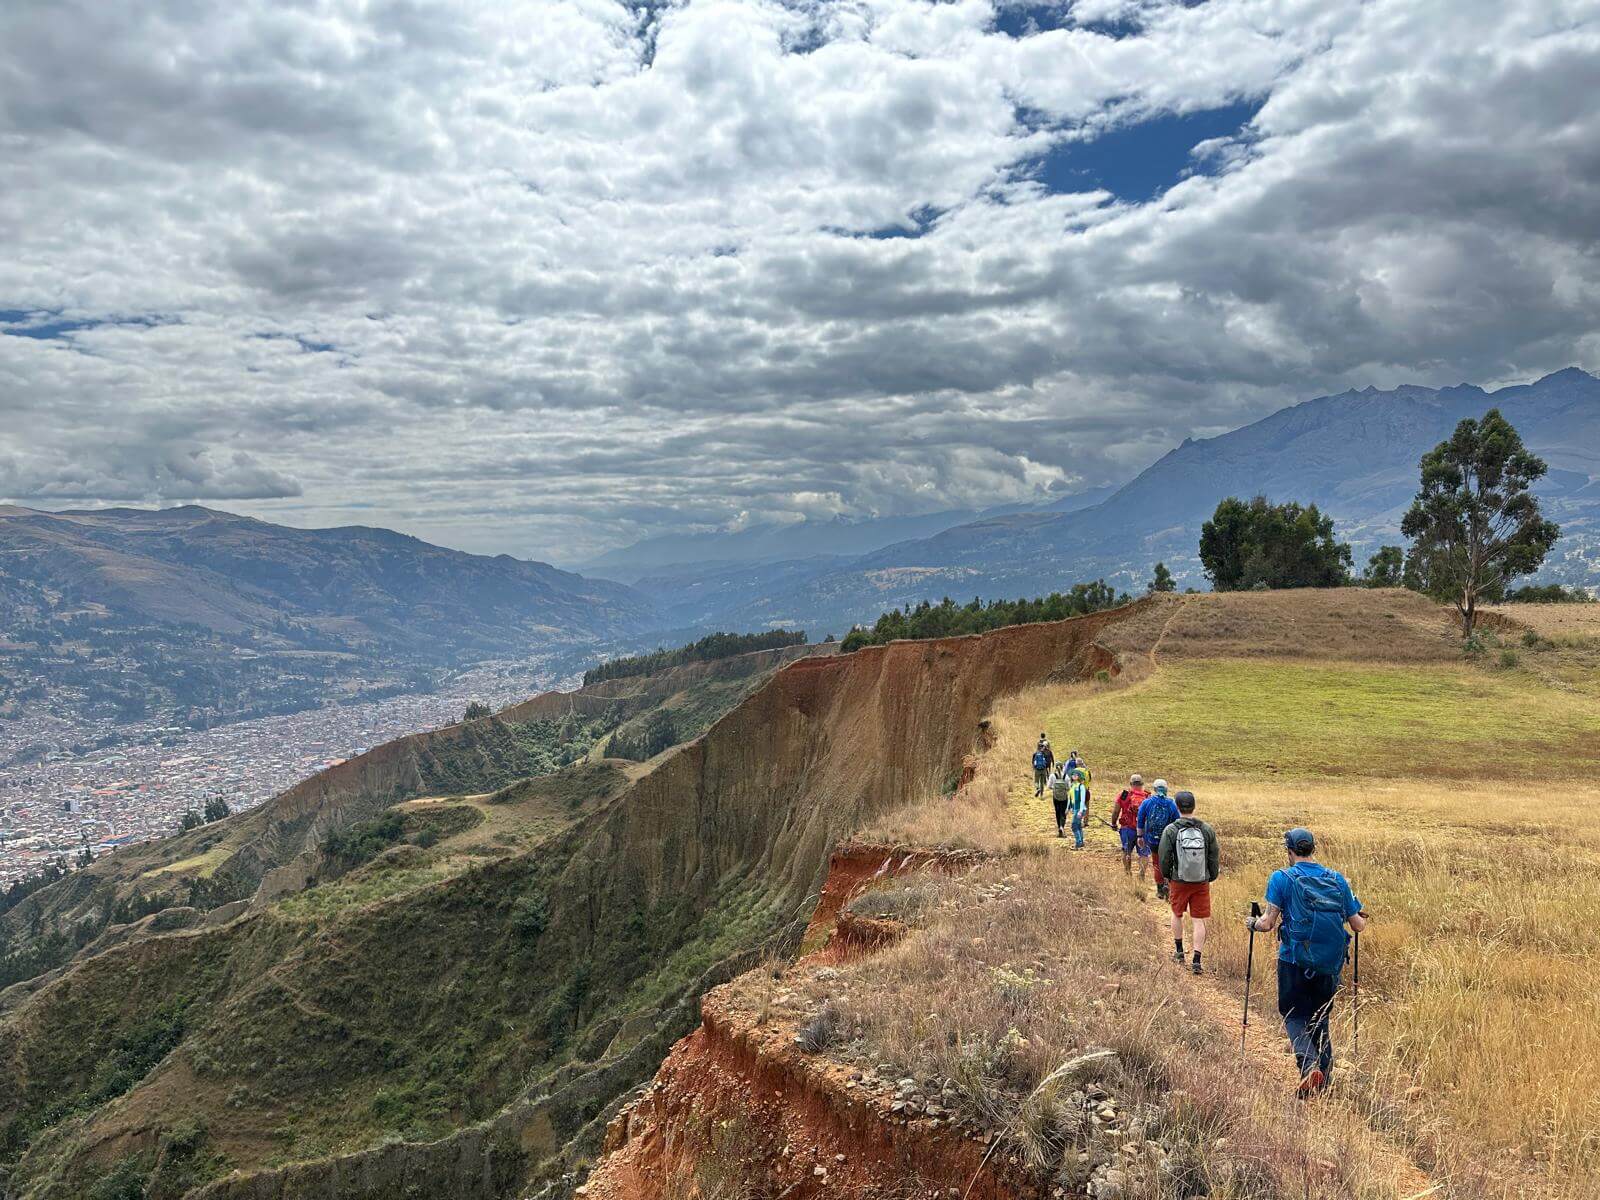 A group of people walk along a ridge with golden grass beneath a cloudy sky with obscured mountains in the background.